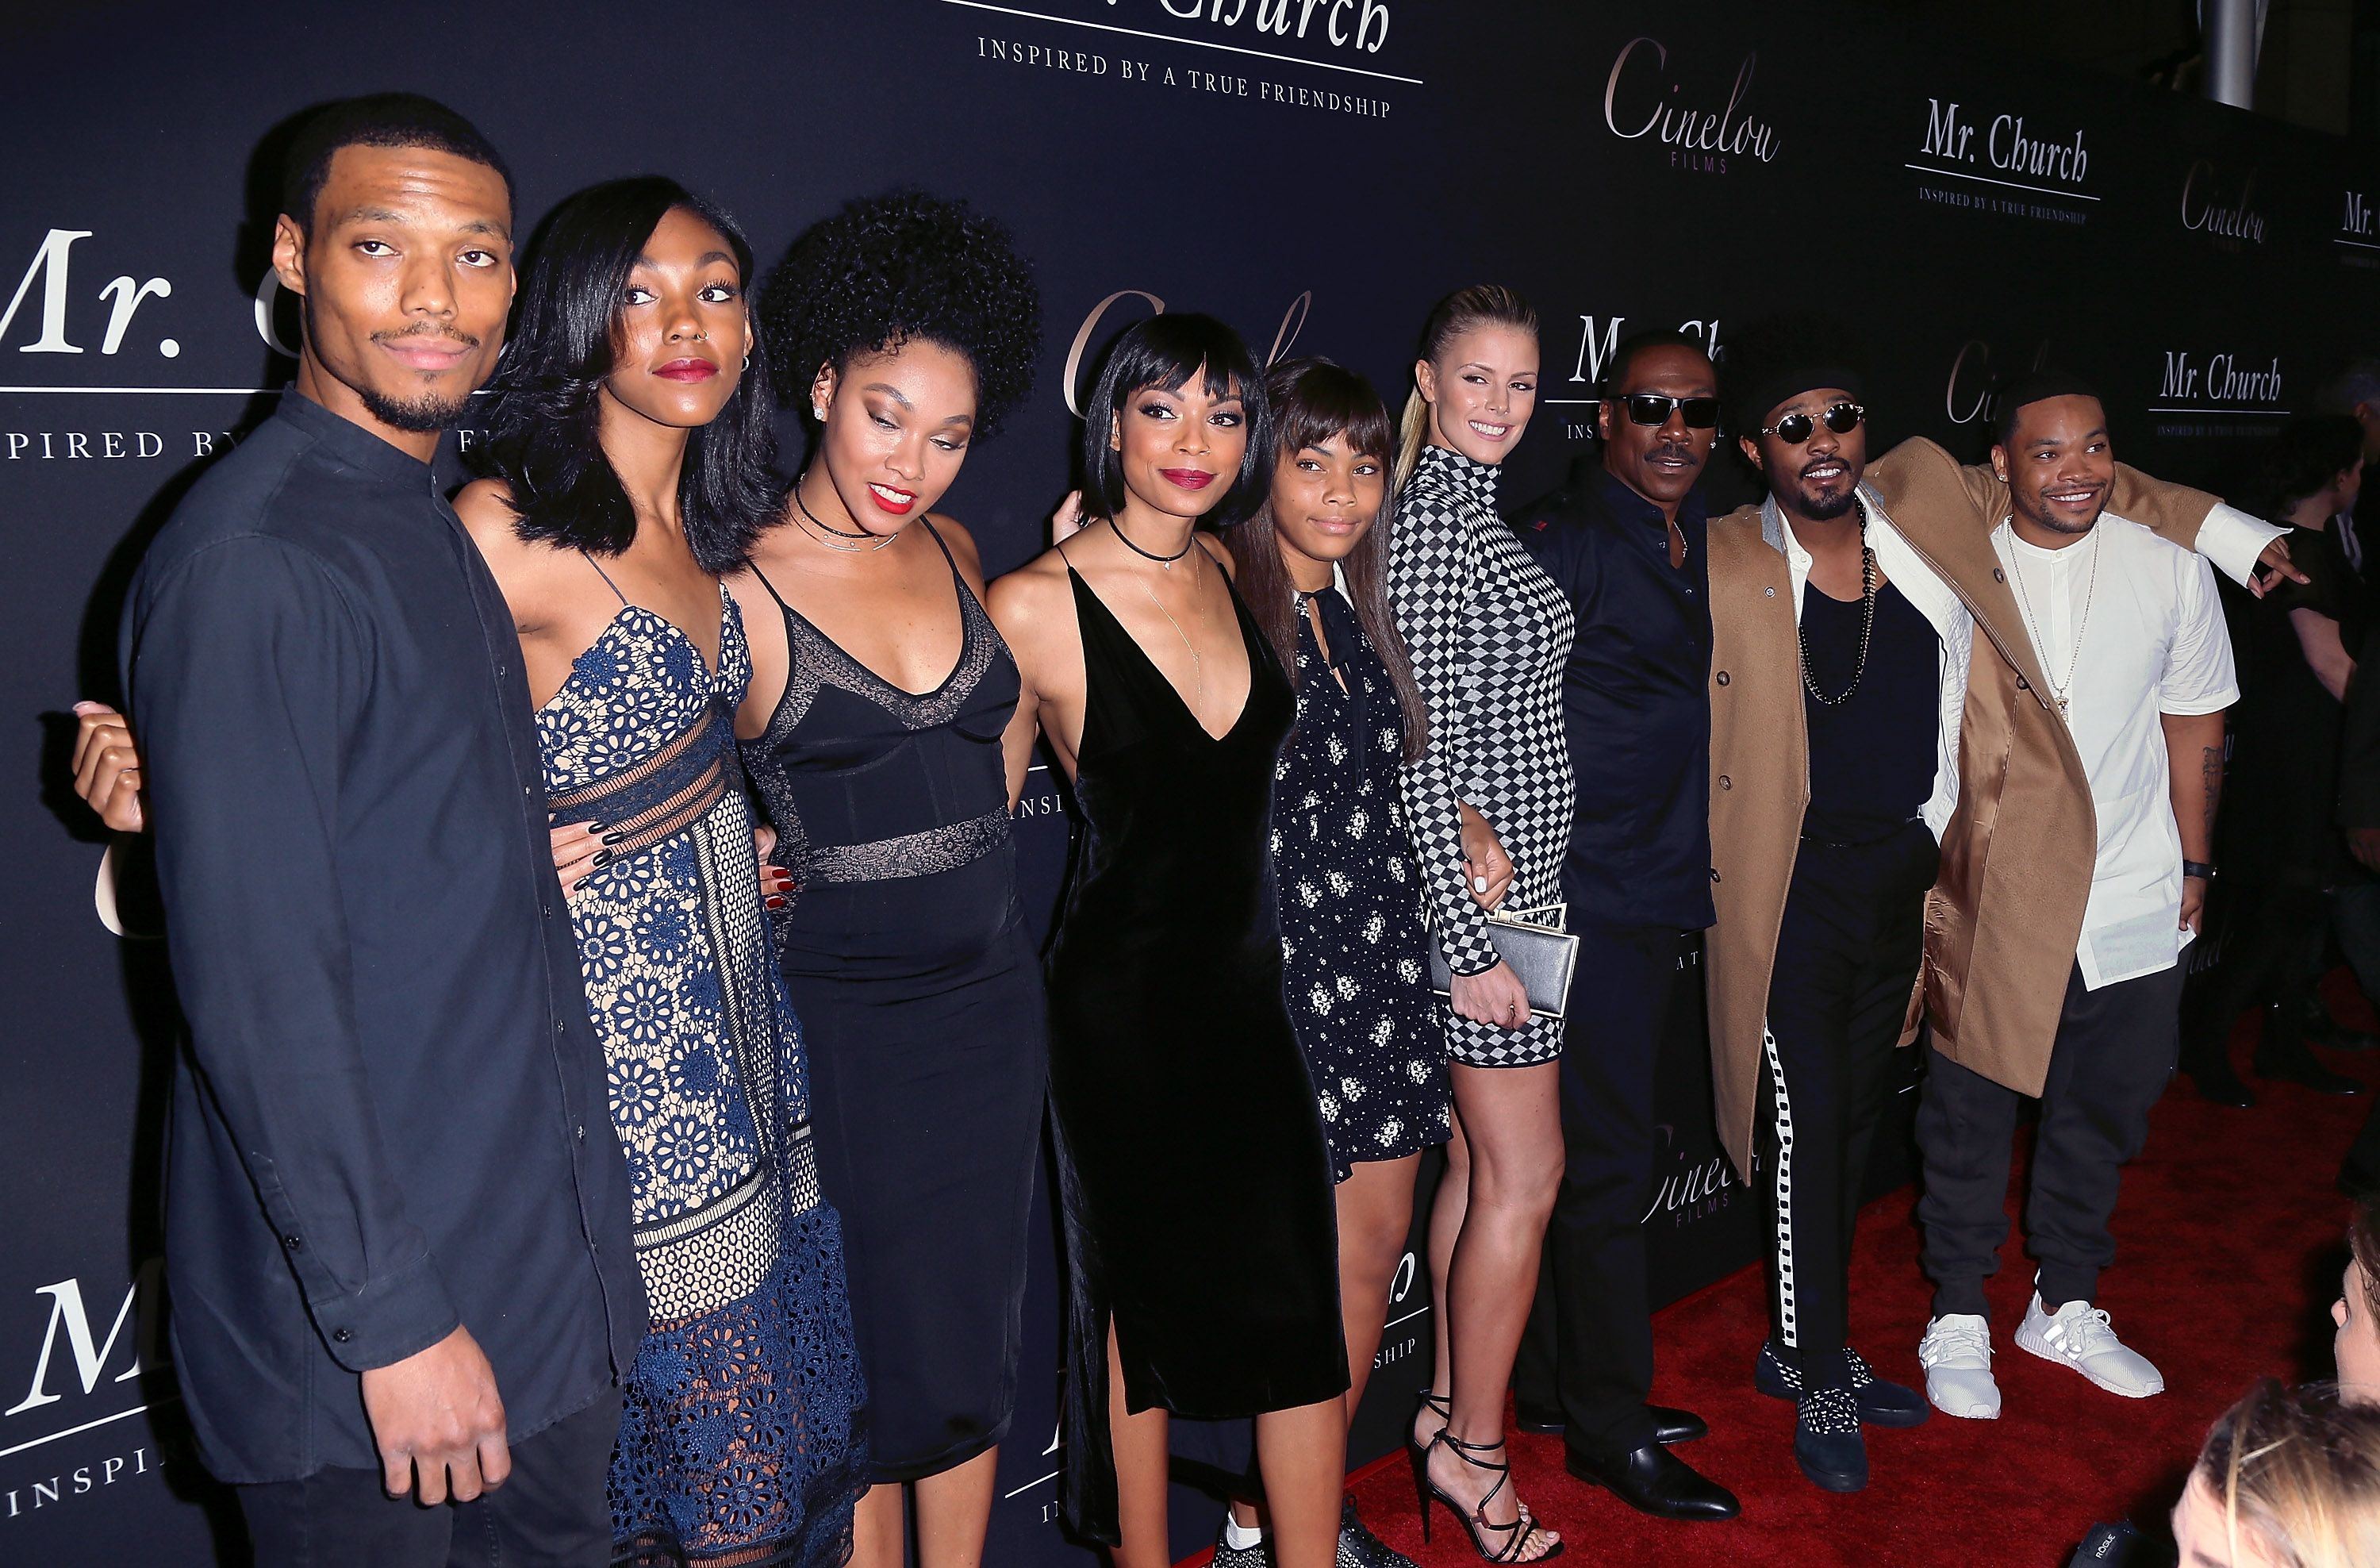 Actor Eddie Murphy with his children at the premiere of Cinelou Releasing's "Mr. Church" at ArcLight Hollywood on September 6, 2016 | Photo: Getty Images